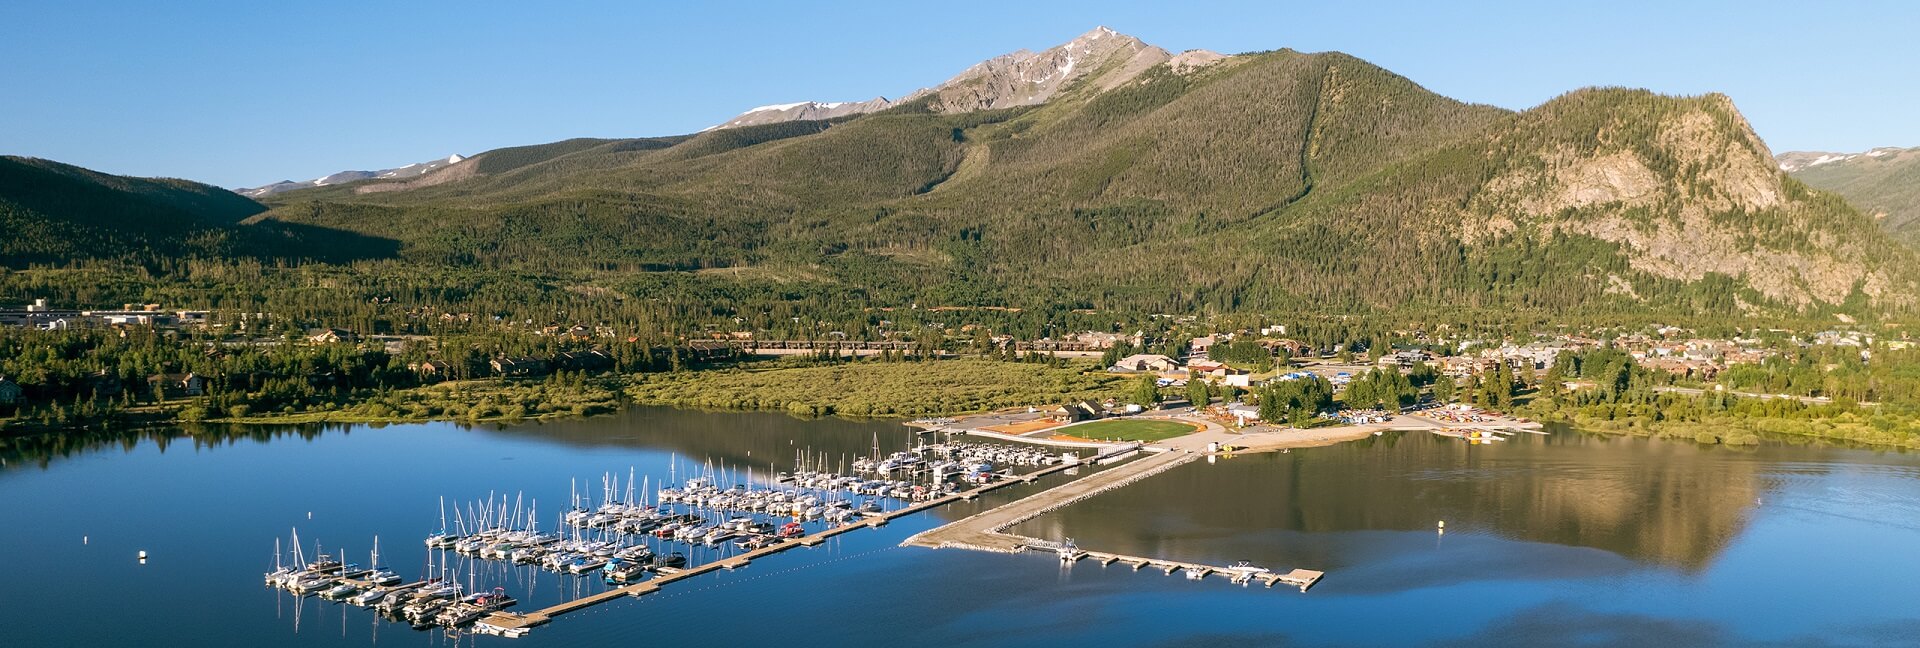 Aerial view of the Frisco Bay Marina with Peak One